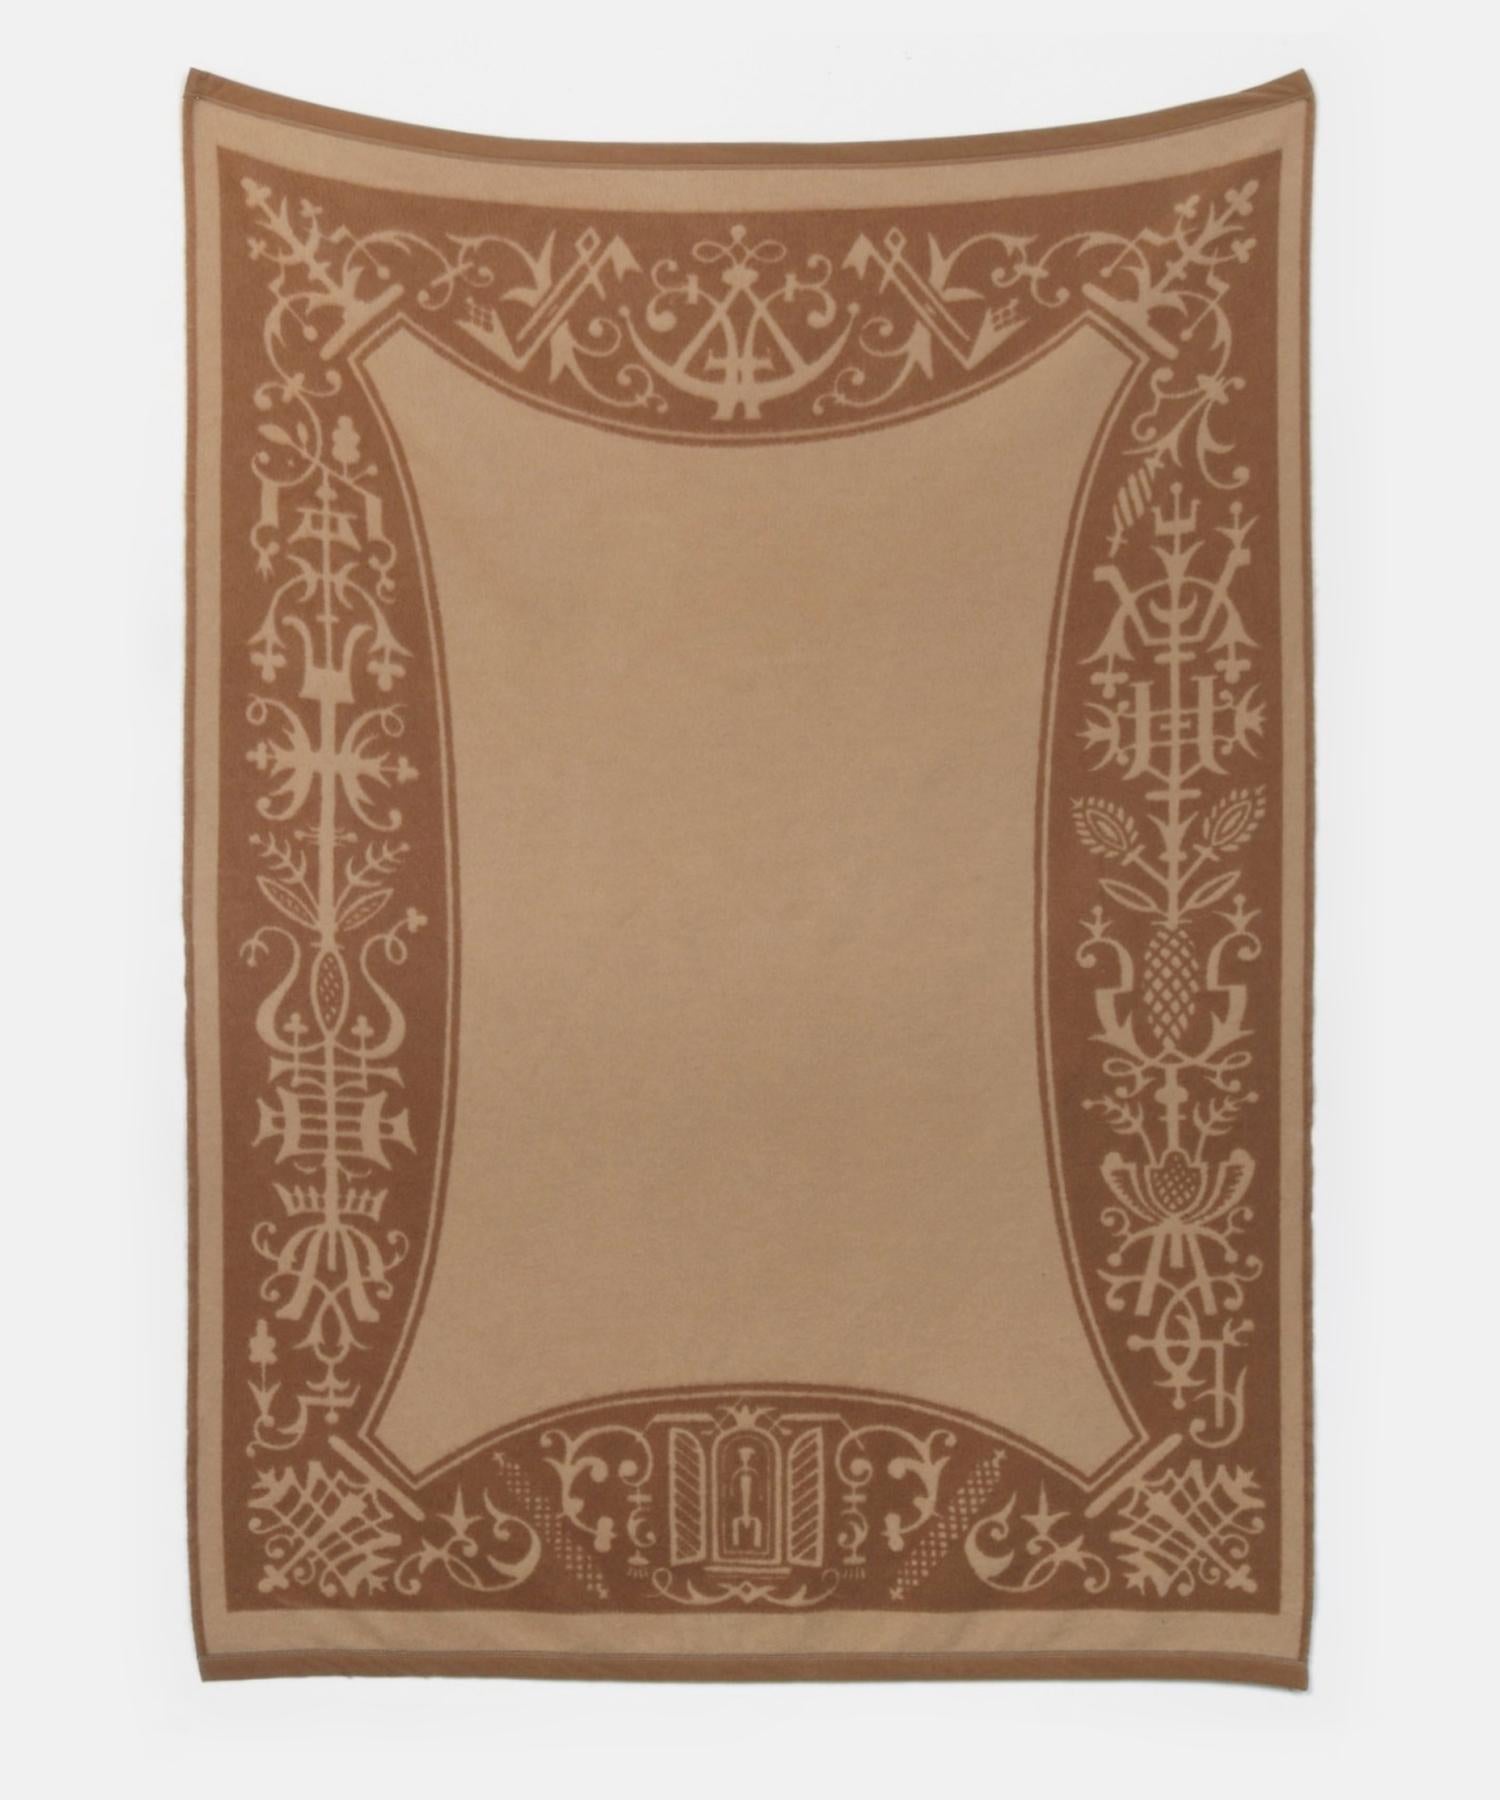 Camelhair Burlap throw by Saved, New York

100% Camelhair. Two-tone, double-sided design features an ornate border and minimal, blank space within. Available in King and Queen sizes, please inquire for pricing, availability, and lead time.